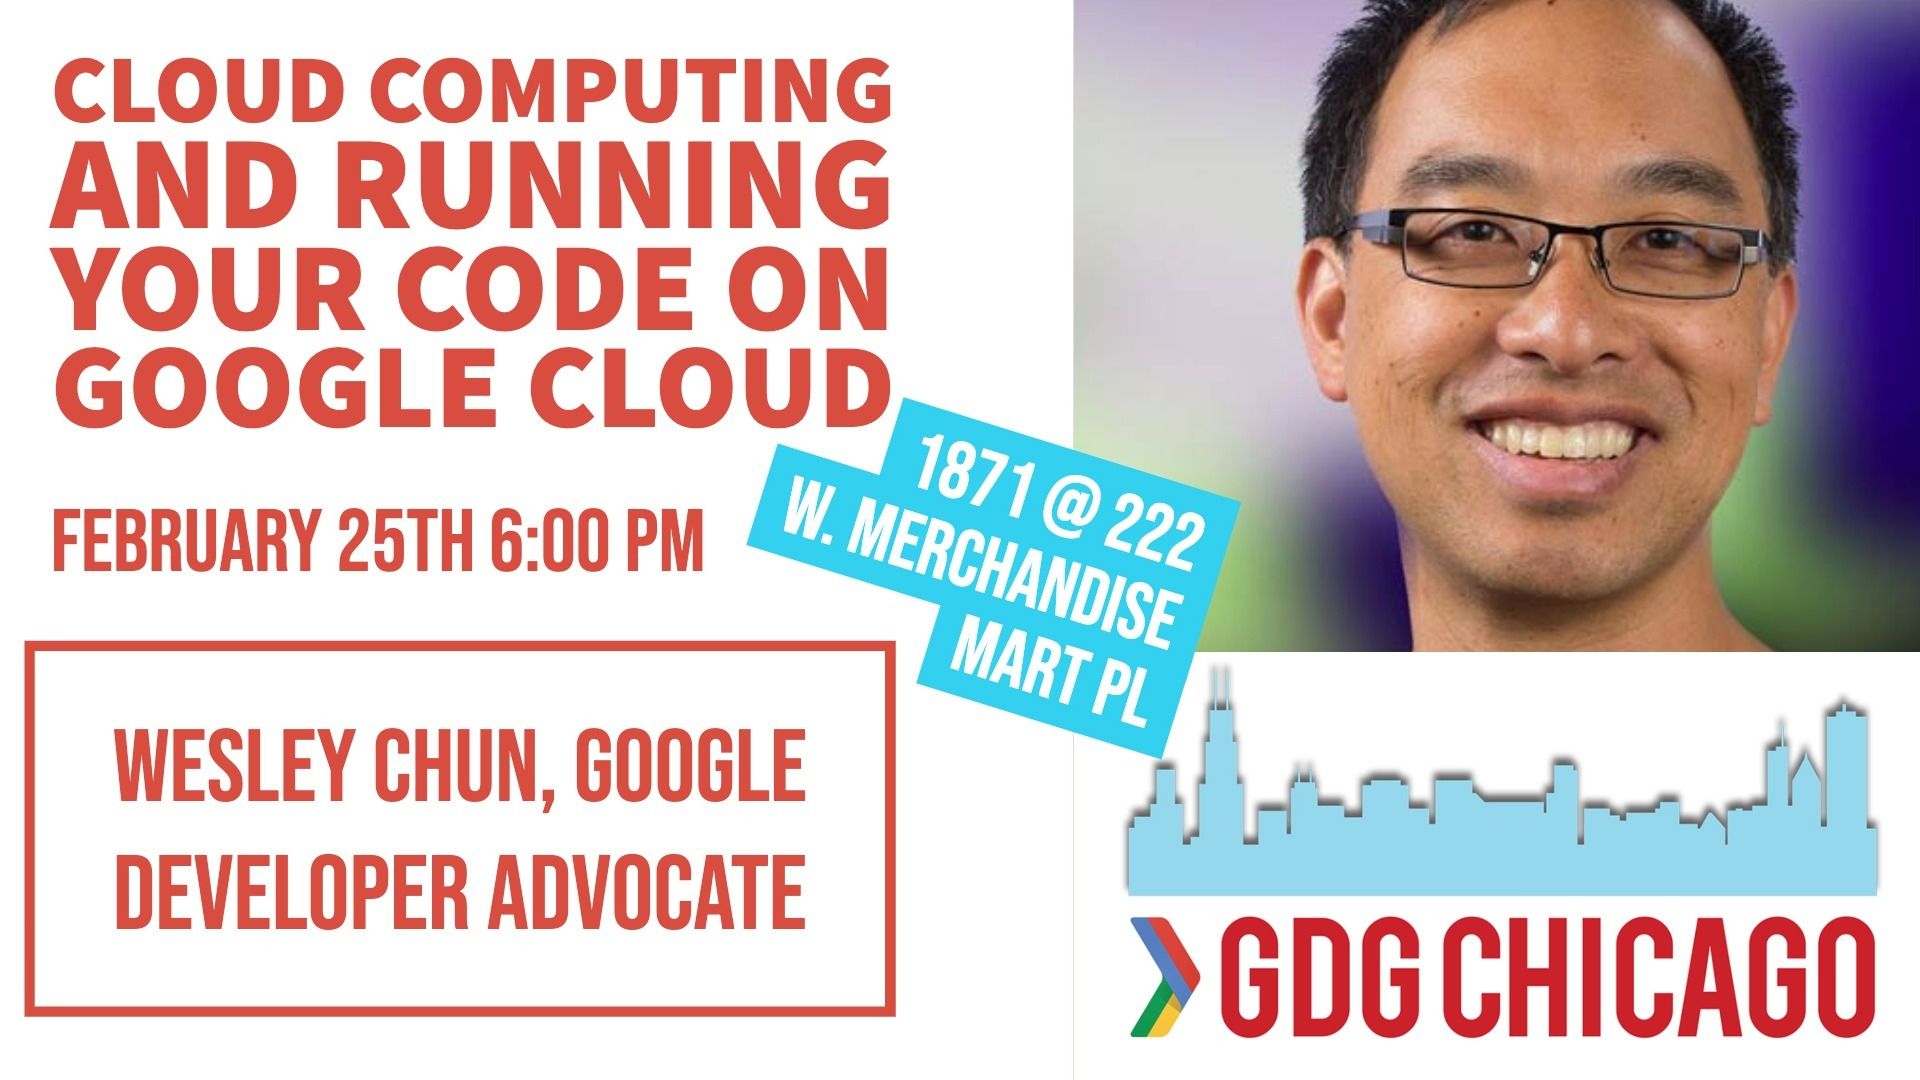 Cloud Computing and Running Your Code on Google Cloud